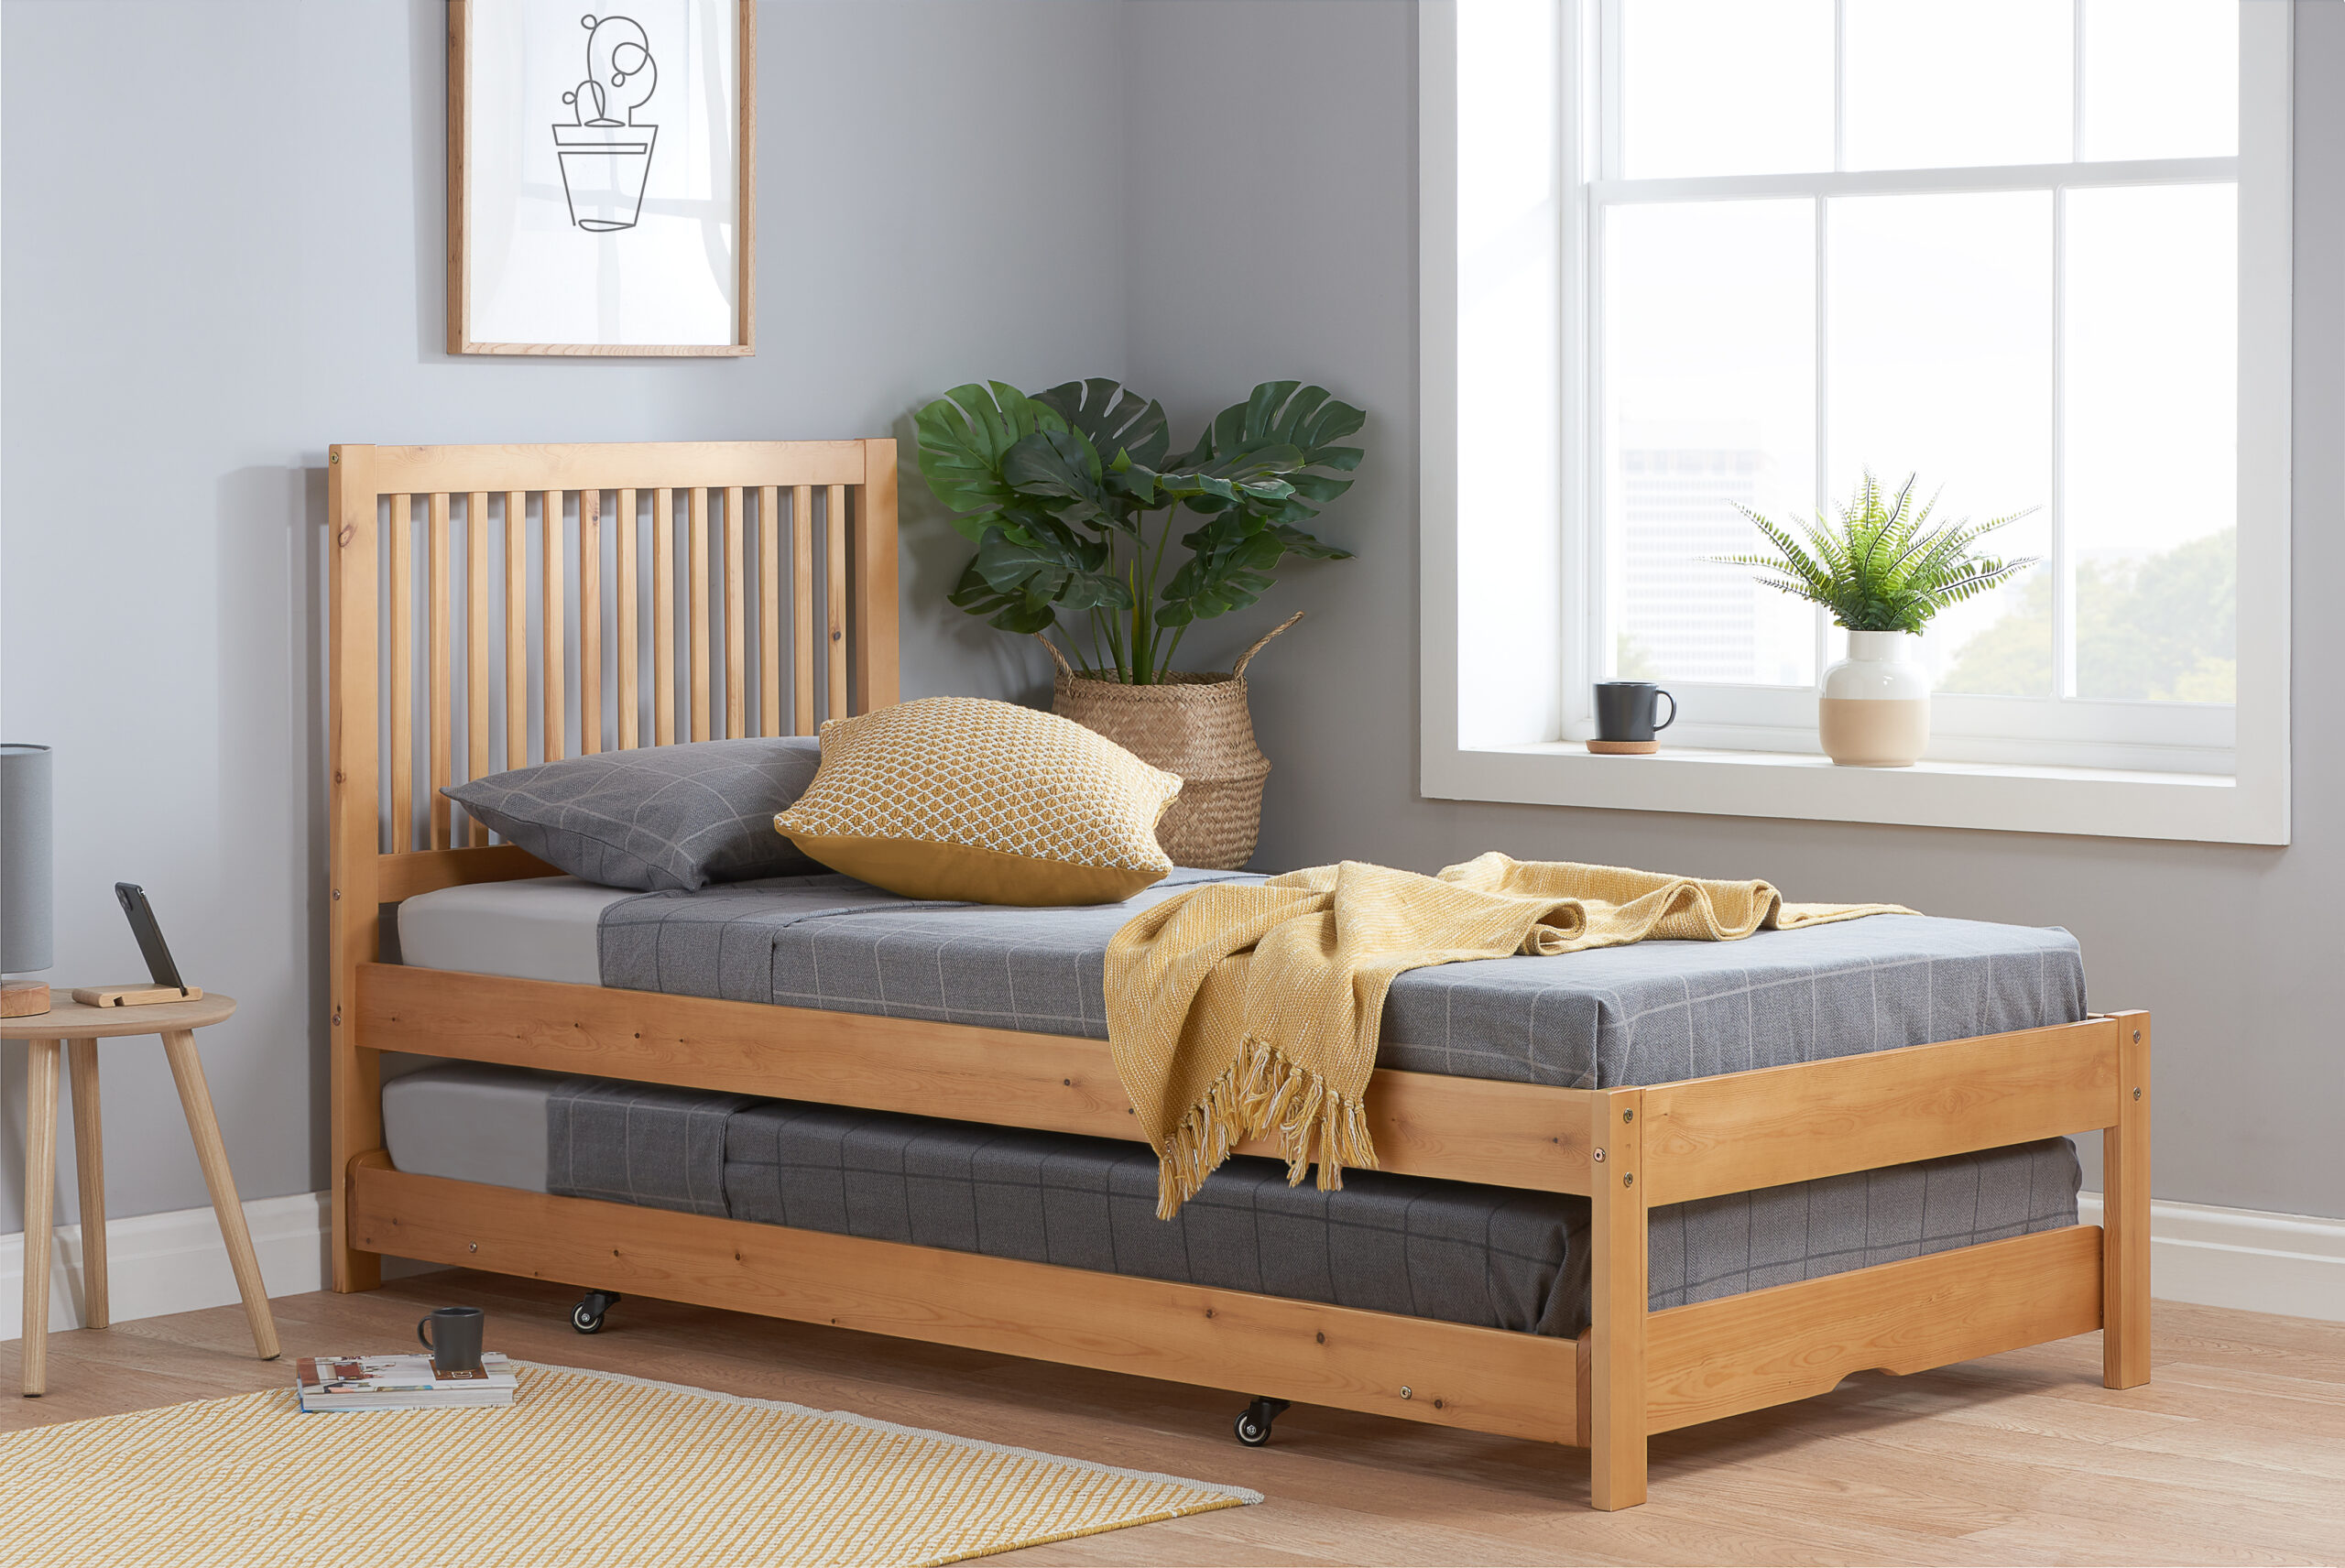 2 IN 1 Wooden Gust bed in honey pine. also available in white finish. (mattress extra)